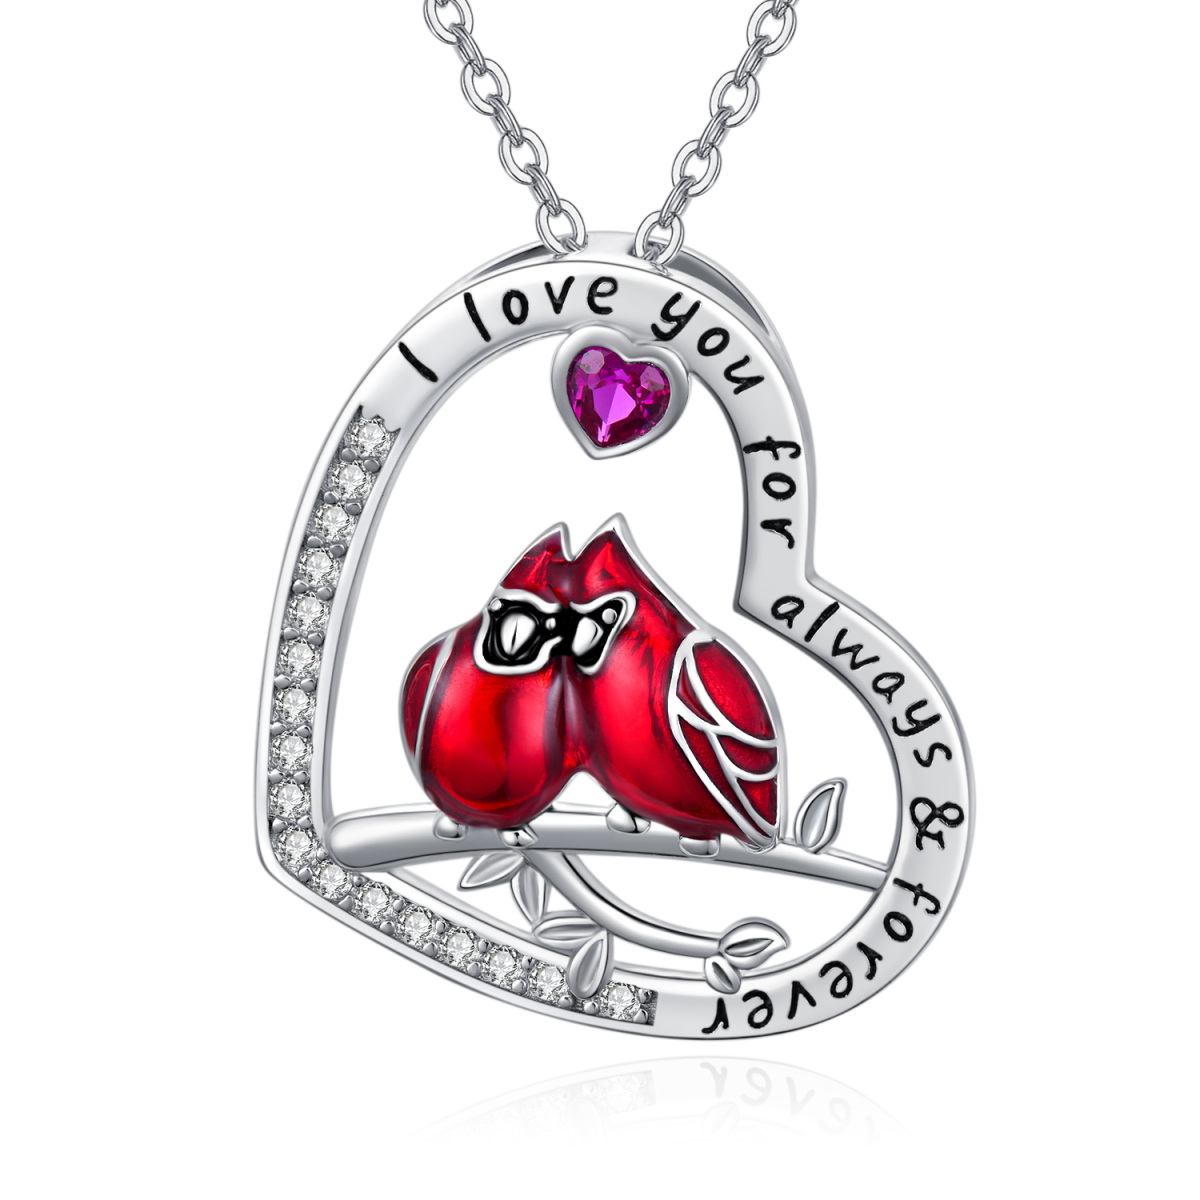 Sterling Silver Heart Shaped Cubic Zirconia Cardinal Pendant Necklace with Engraved Word-1